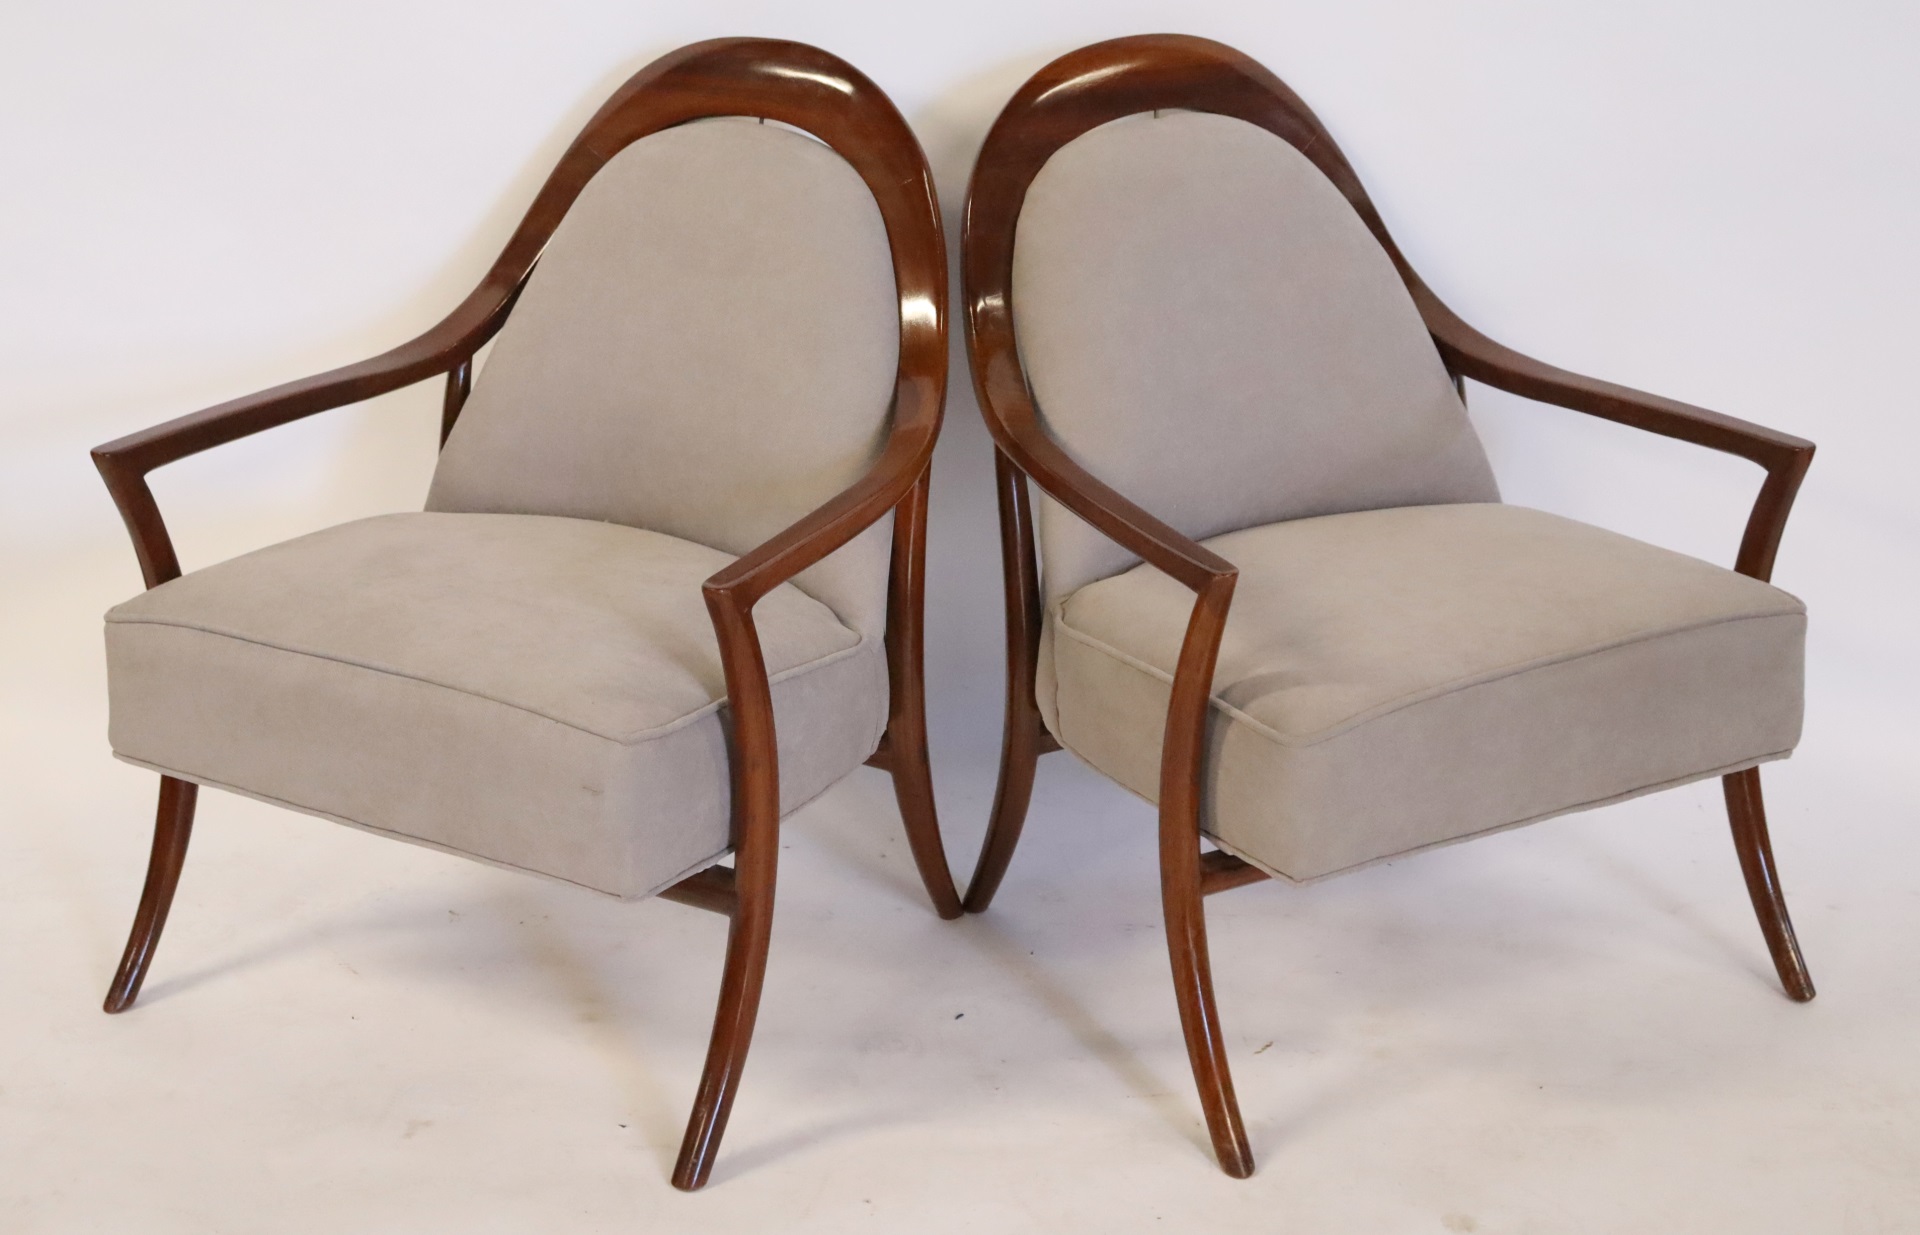 MIDCENTURY PAIR OF UPHOLSTERED